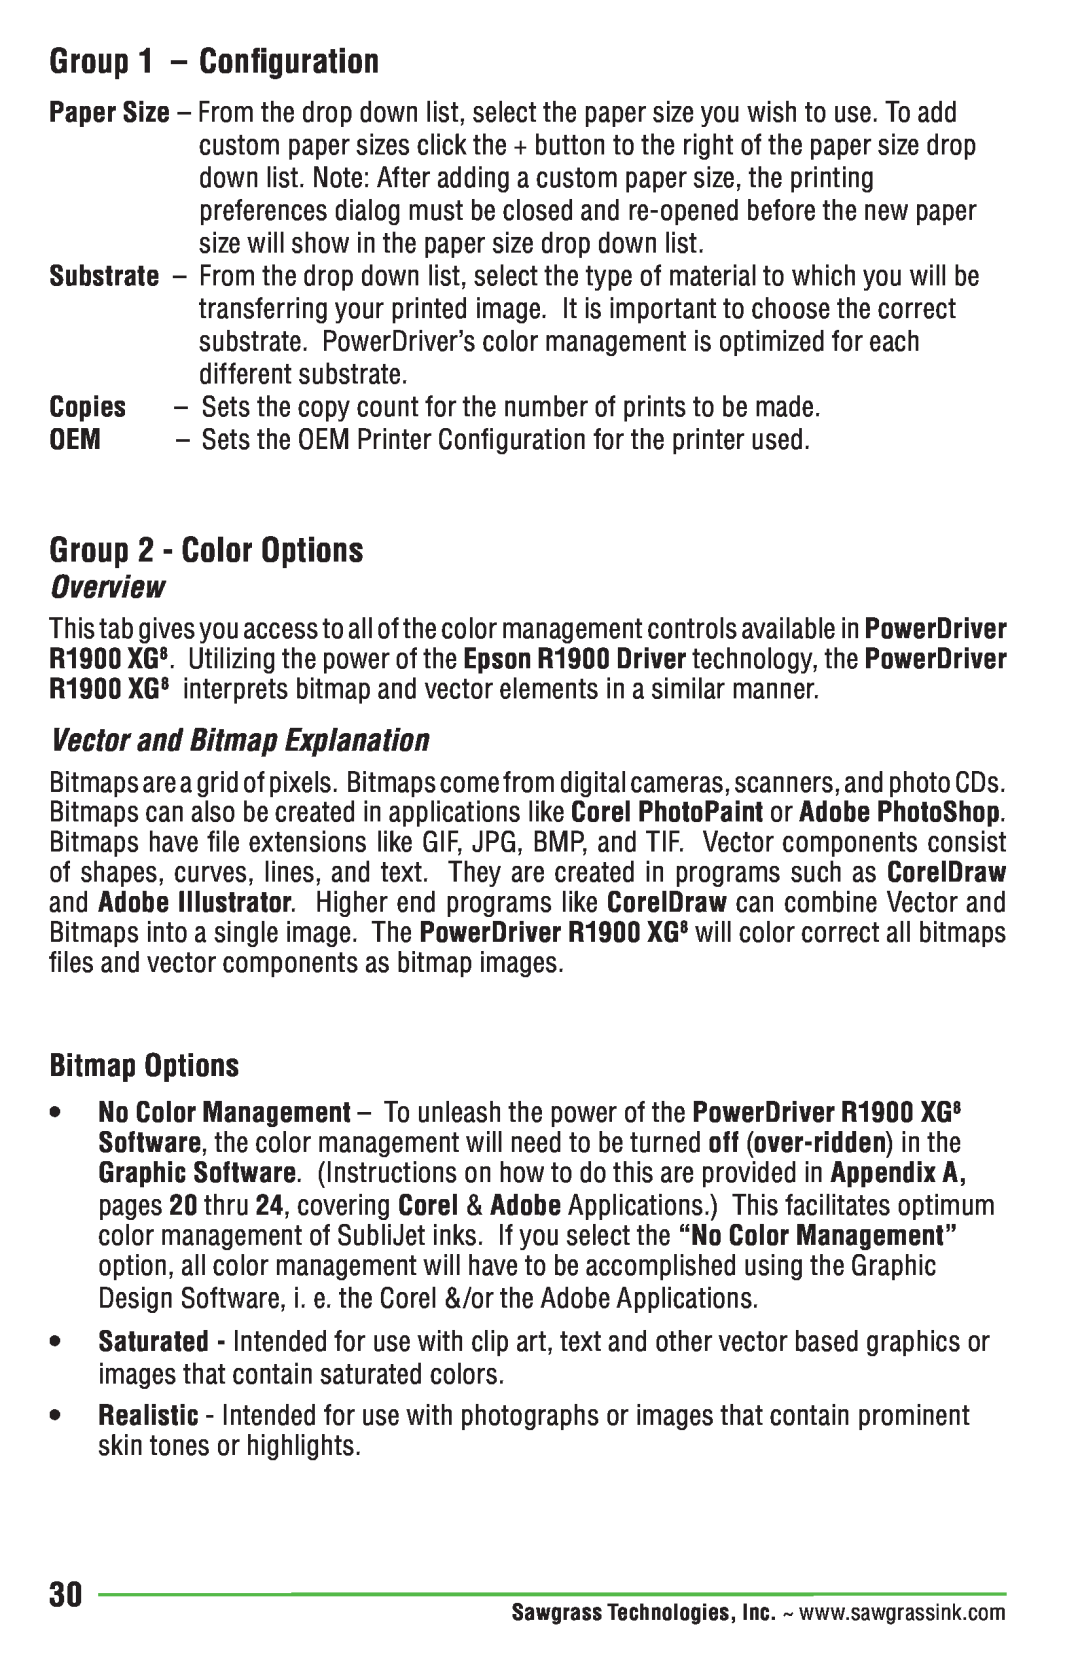 Epson R1900 Group 1 - Configuration, Group 2 - Color Options, Overview, Vector and Bitmap Explanation, Bitmap Options 